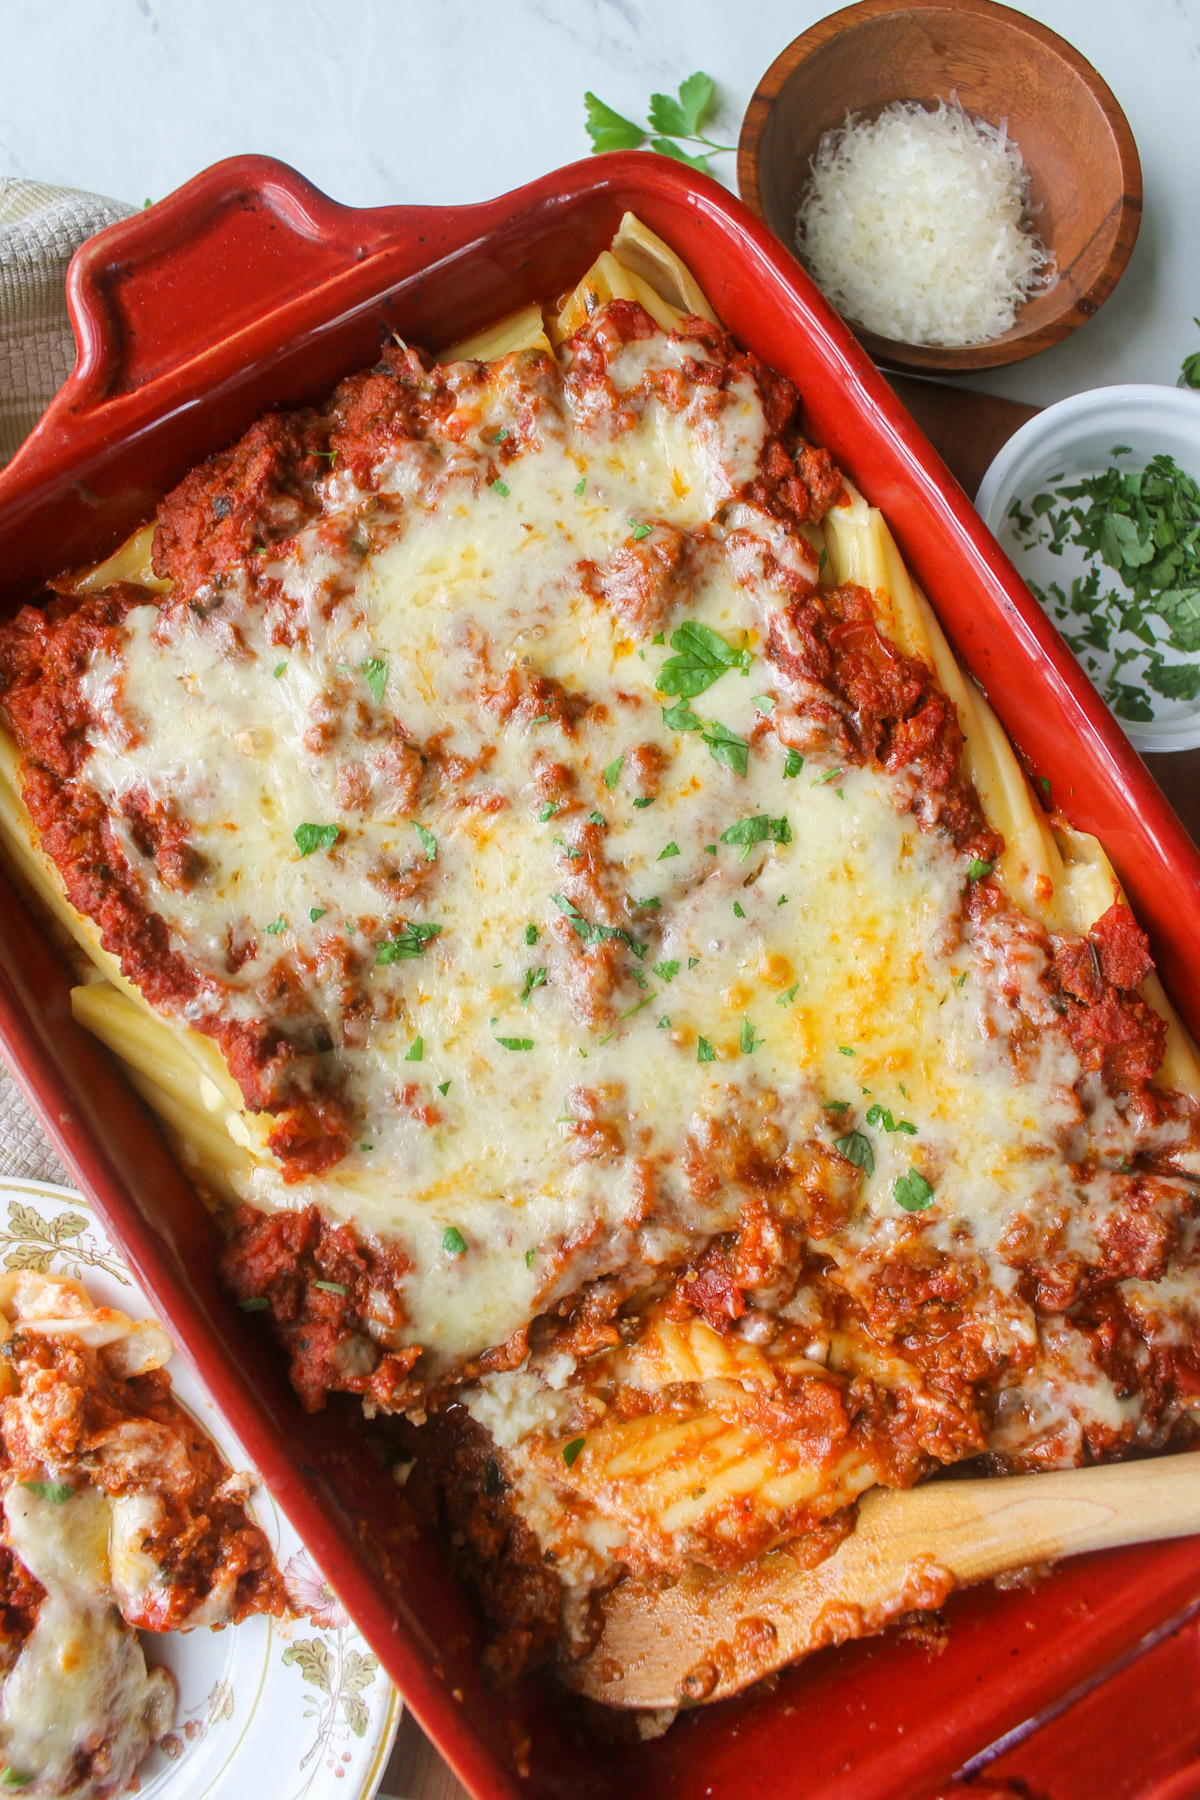 Baked manicotti with red sauce and melted cheese.